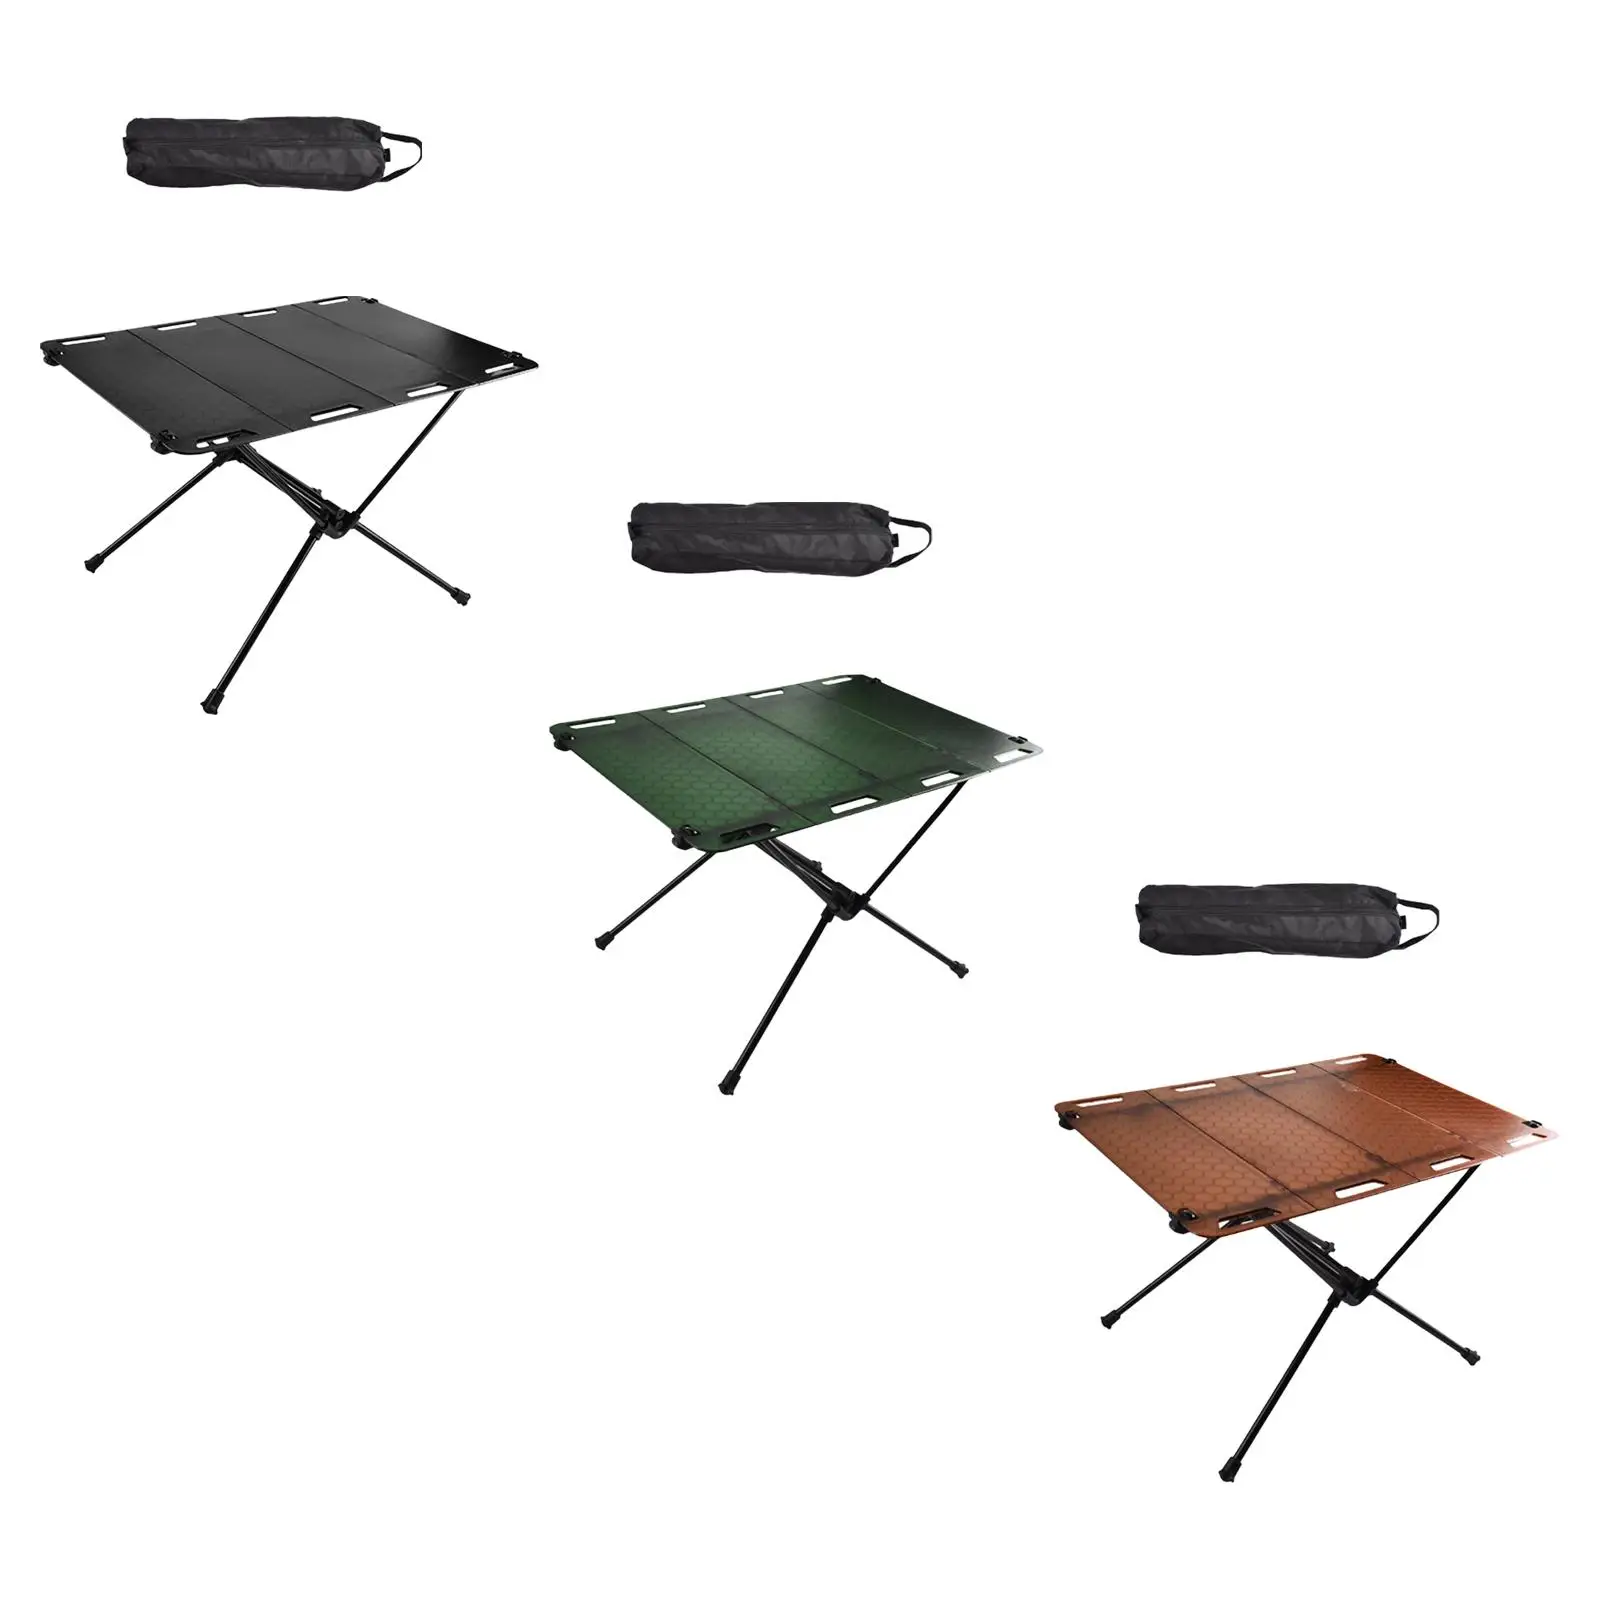 Foldable Camping Table Portable Desk Outdoor Foldable Table Beach Table for Picnic Backyard Fishing Garden Yard